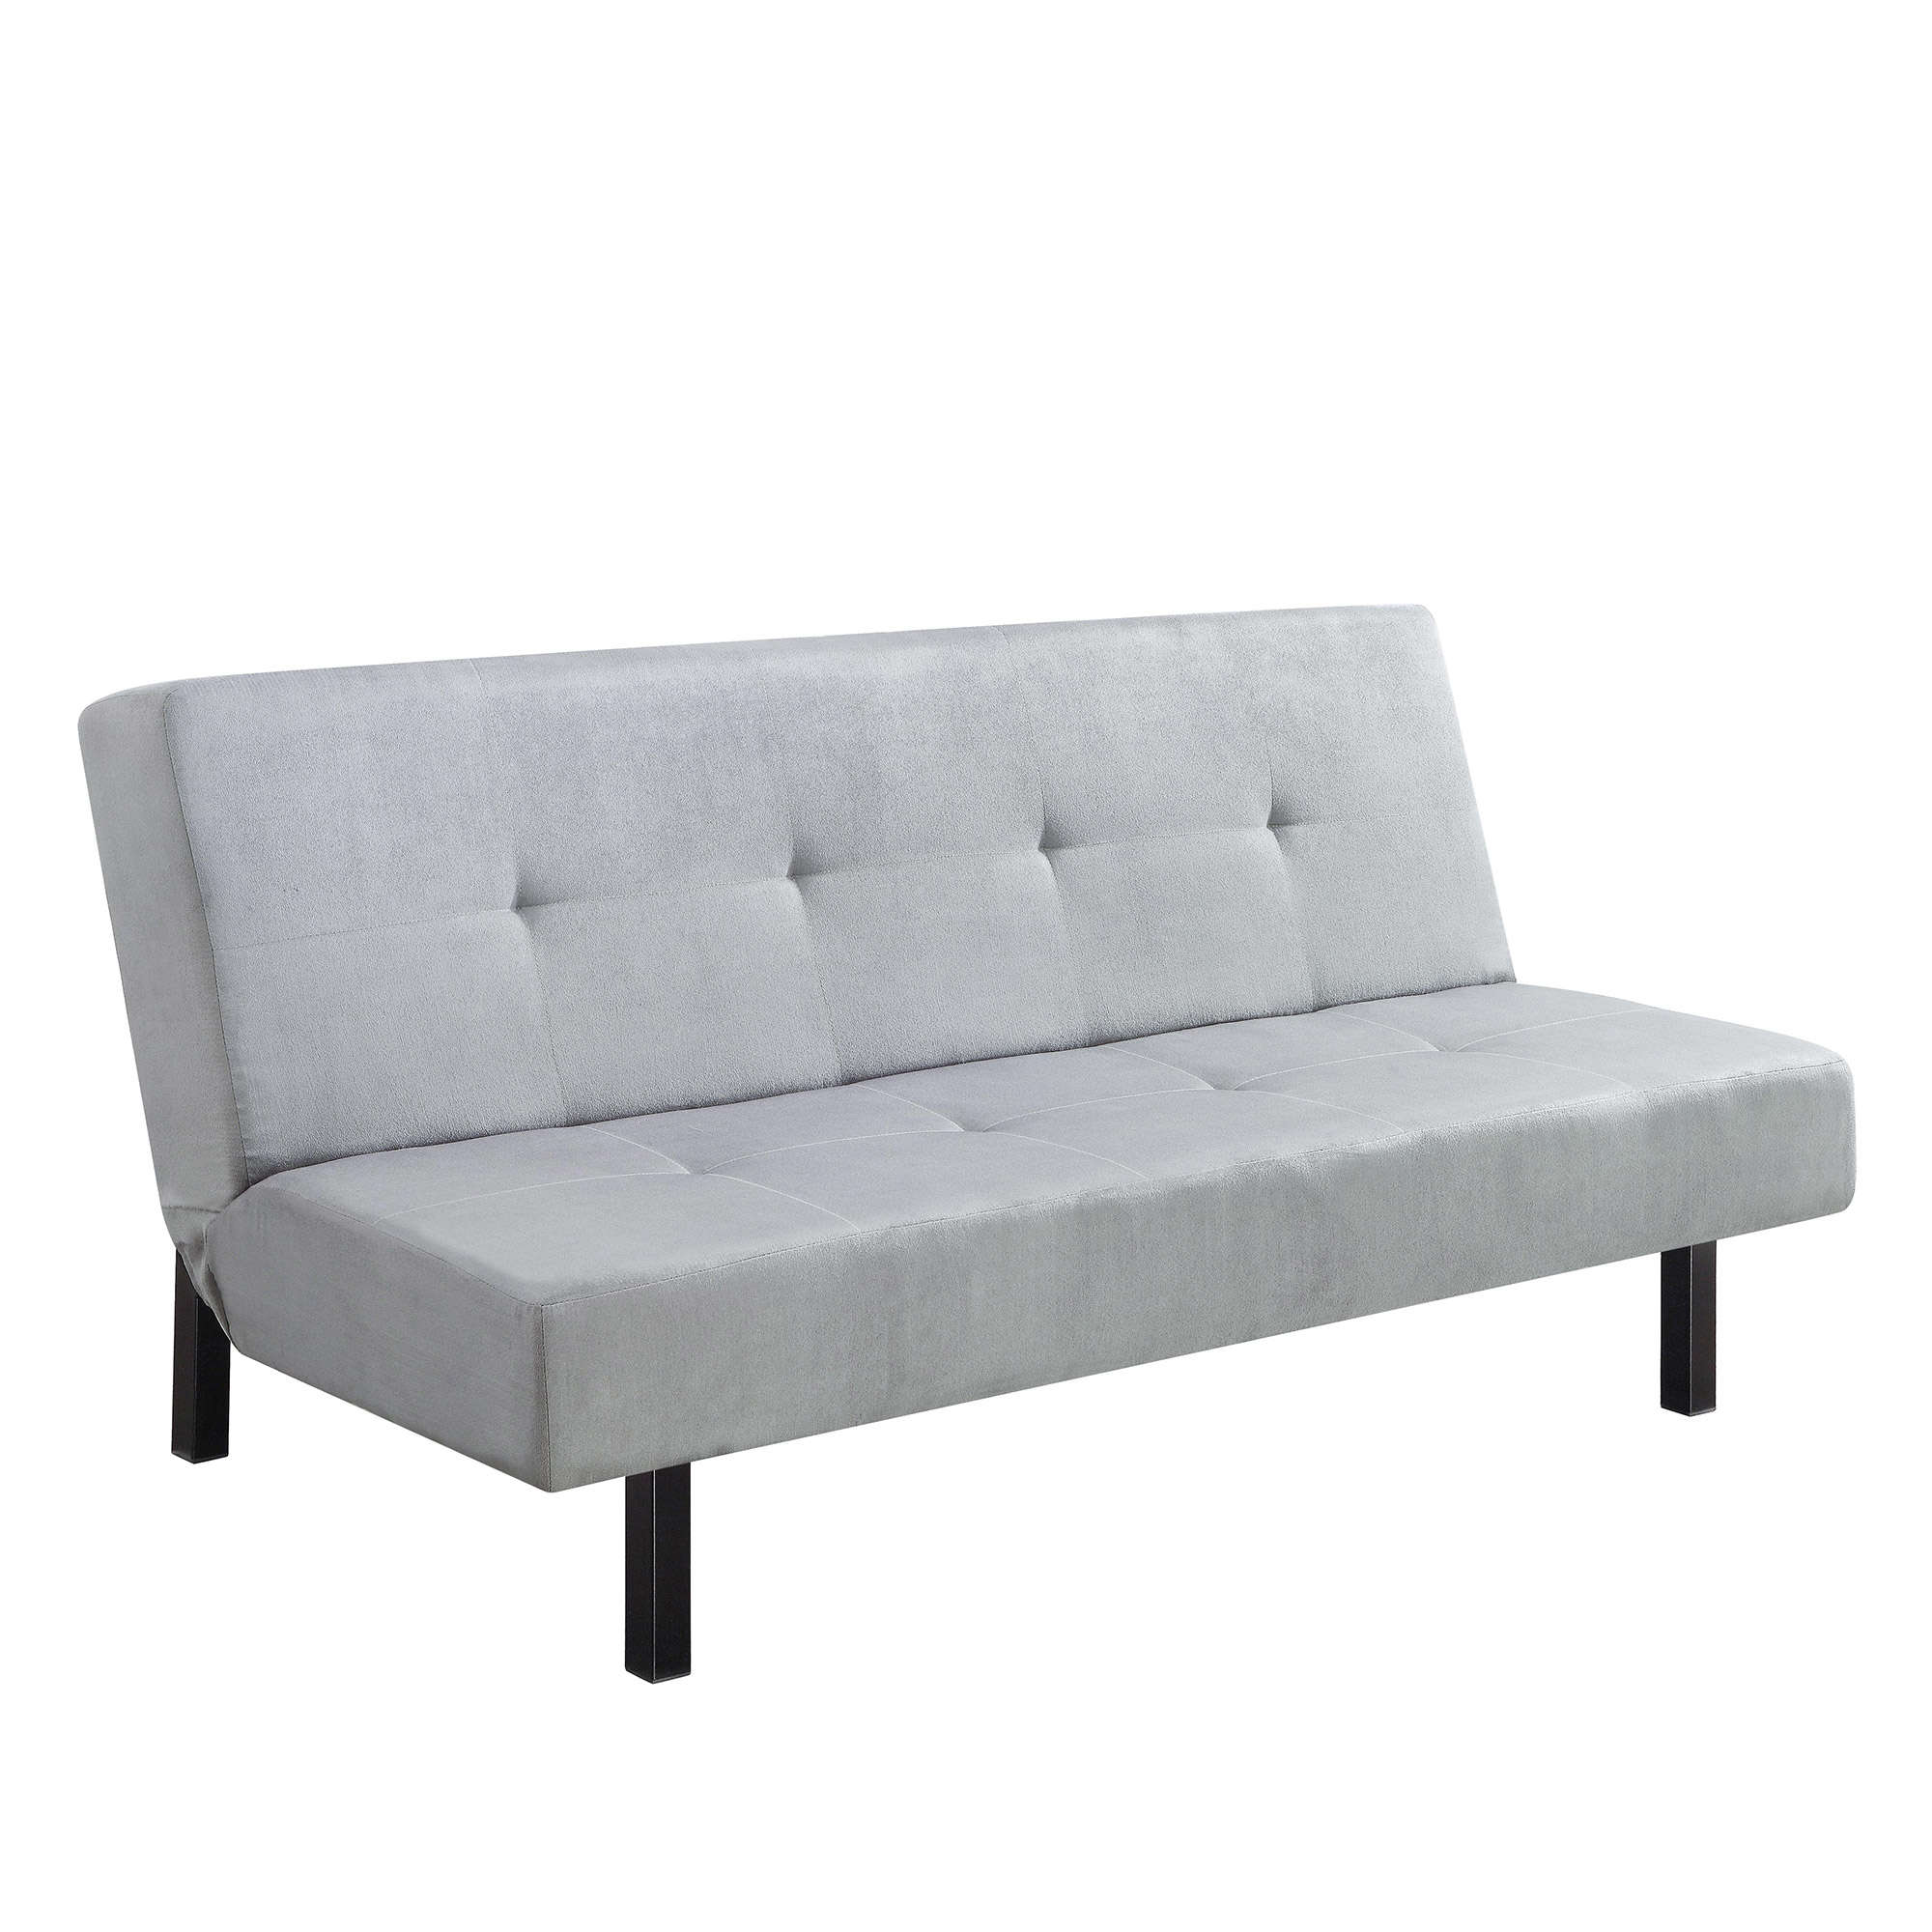 Mainstays 68? 3-Position Tufted Futon, Gray - image 3 of 6